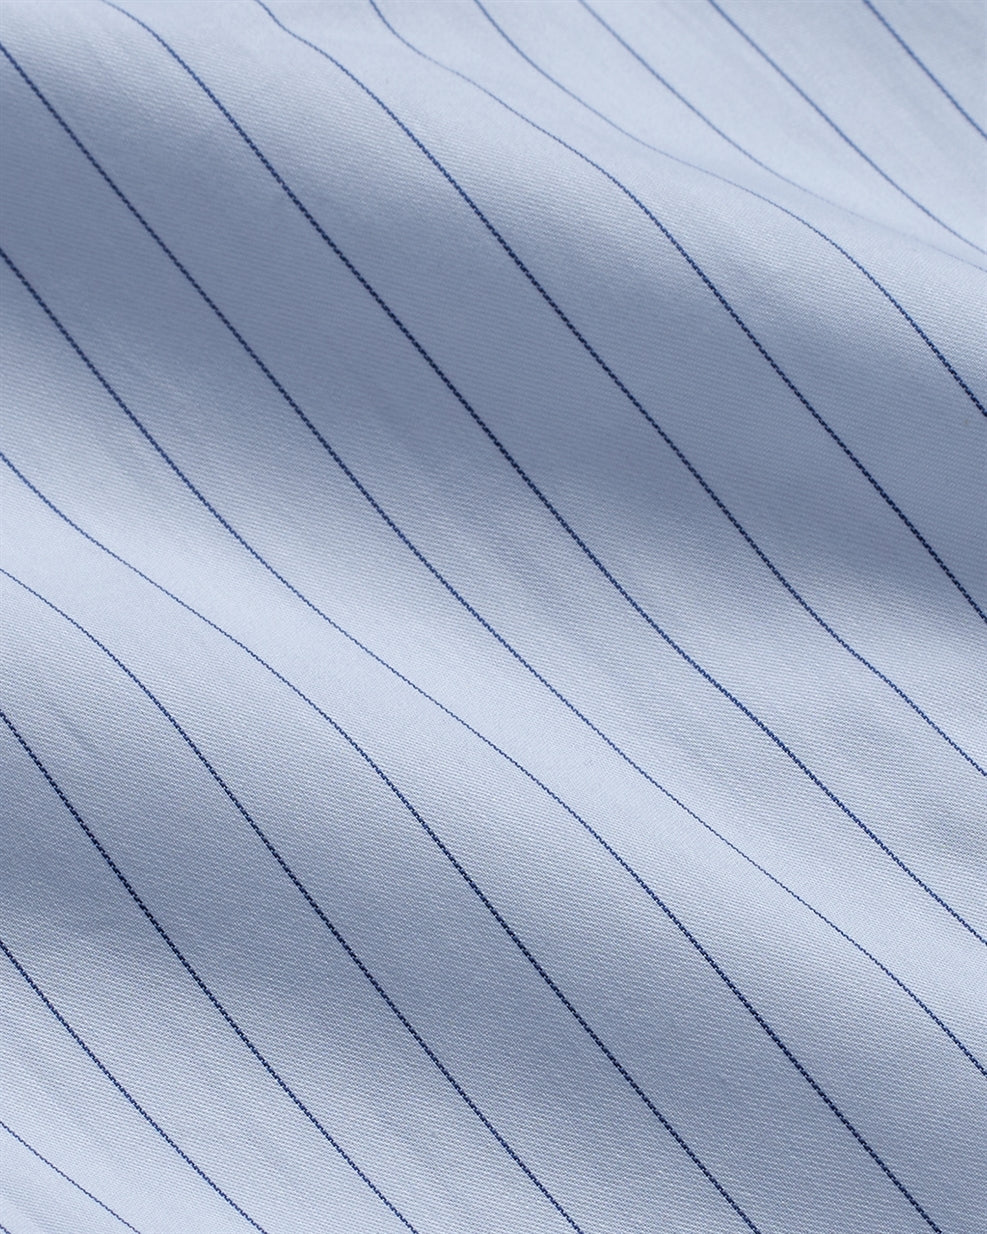 T the brand Pinstripe Slim Fit Full Sleeved Cotton Shirt - Blue